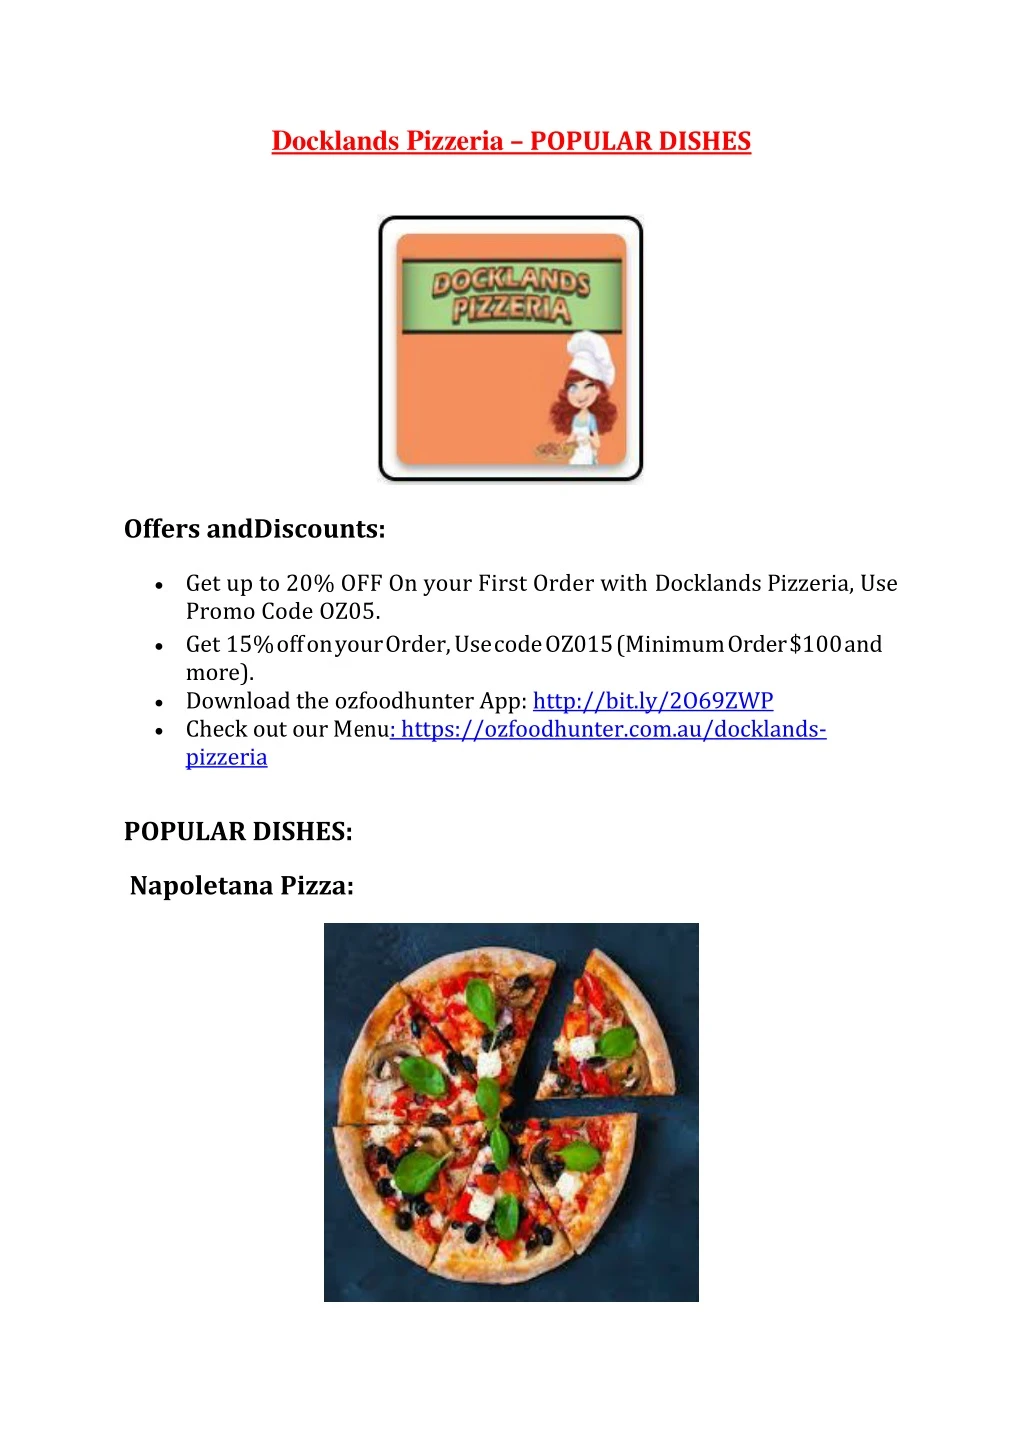 docklands pizzeria popular dishes